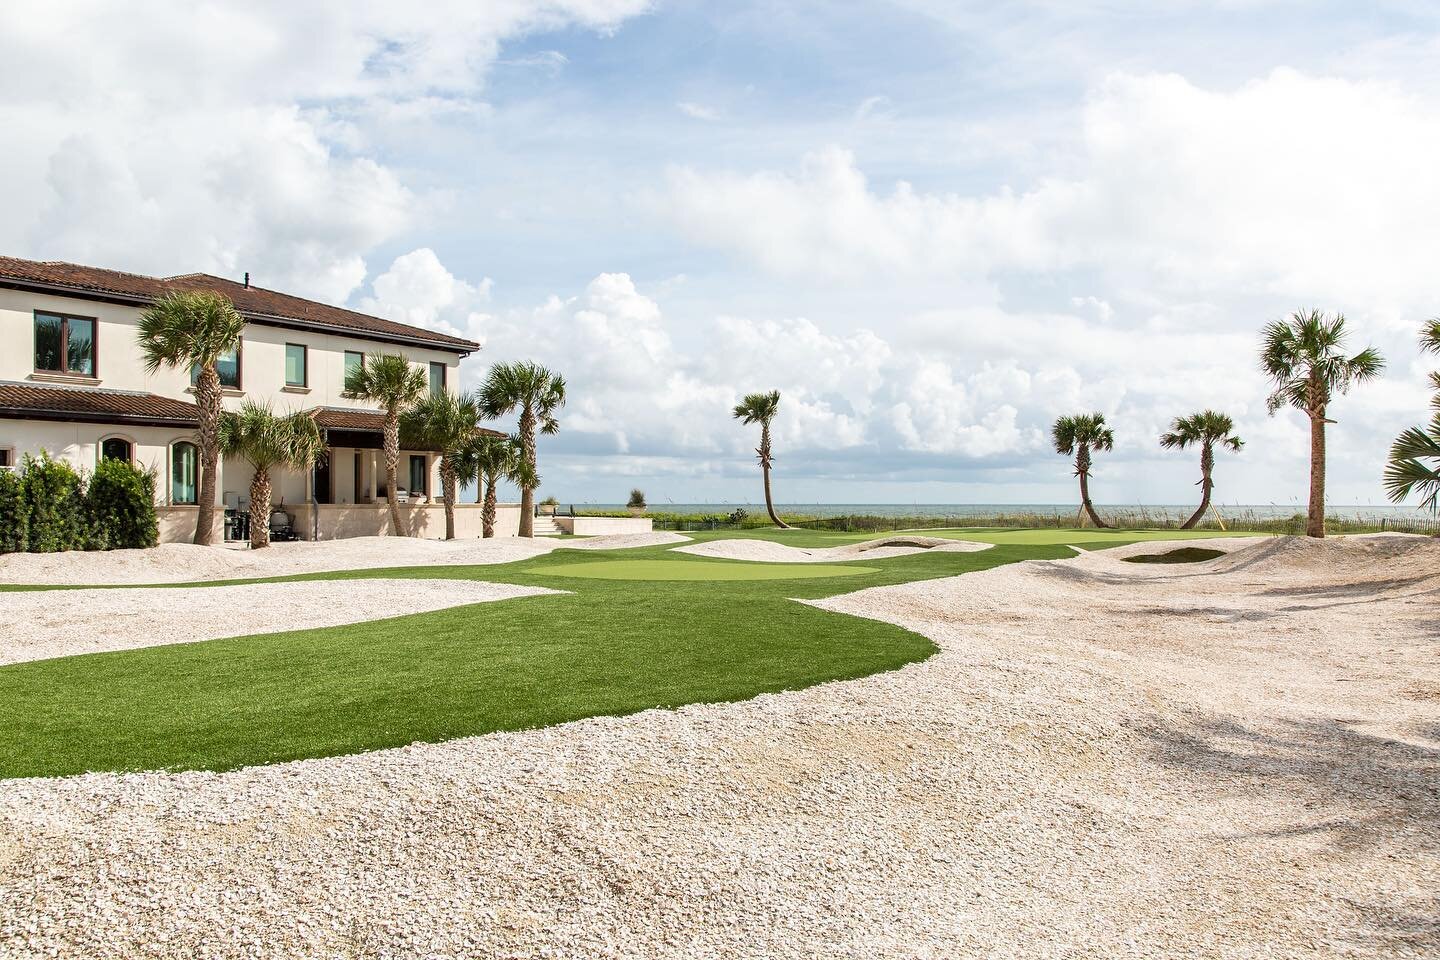 16,000 sq. feet of perfection! 😍⛳️ #seapinelandscape